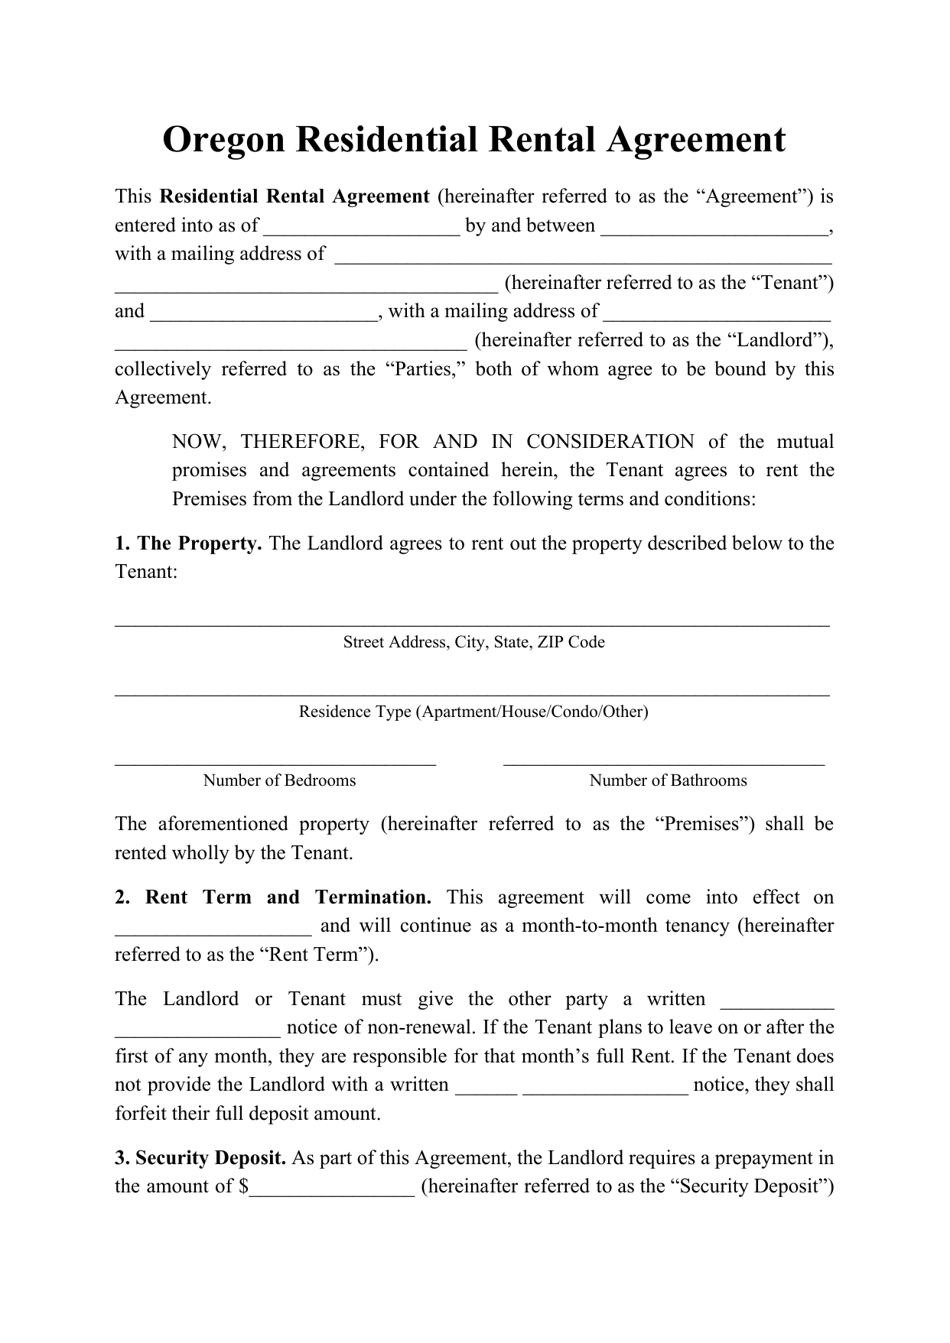 oregon-residential-rental-agreement-template-fill-out-sign-online